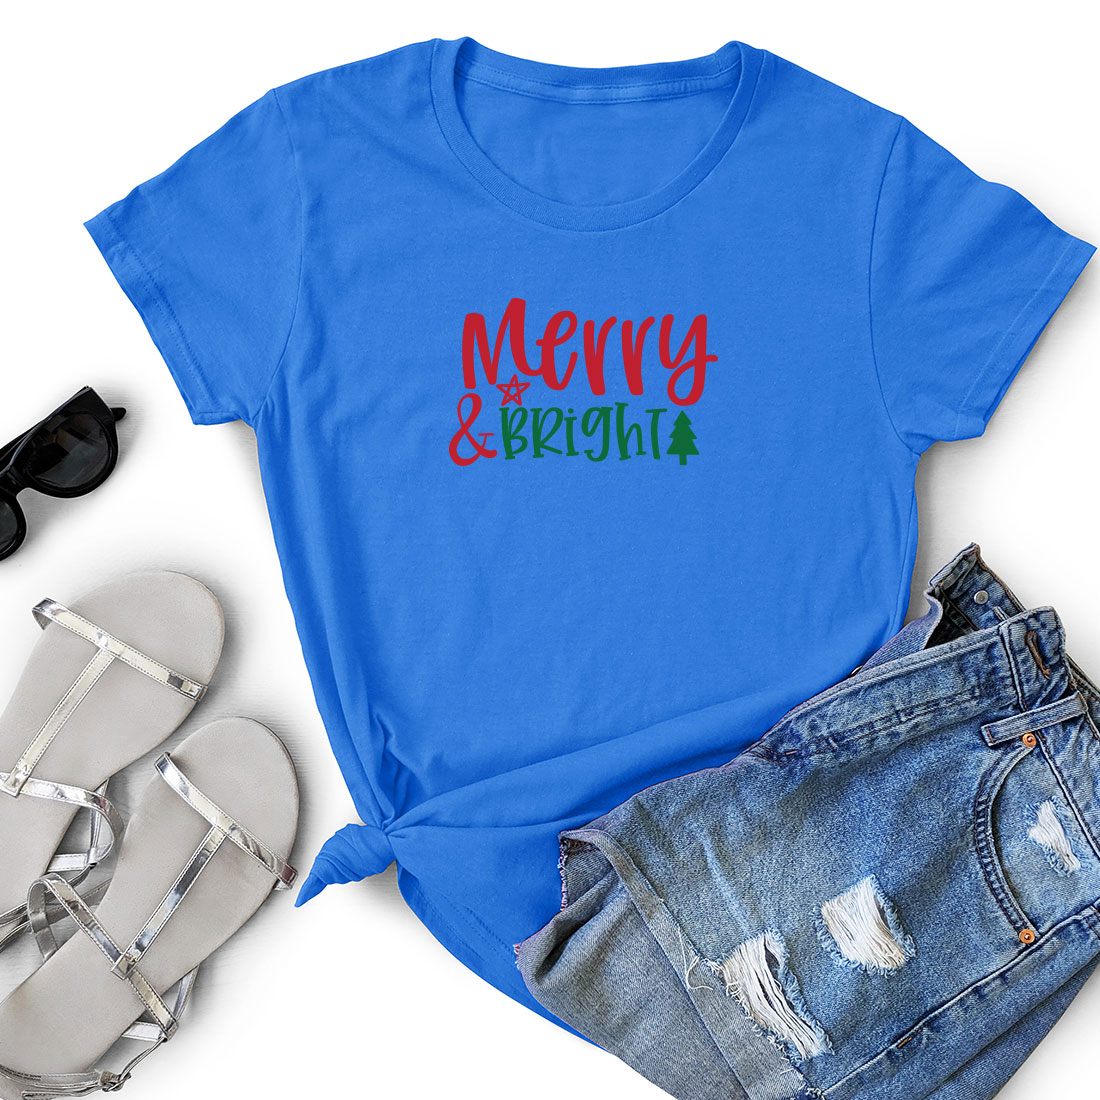 T - shirt that says merry and a pair of shorts.